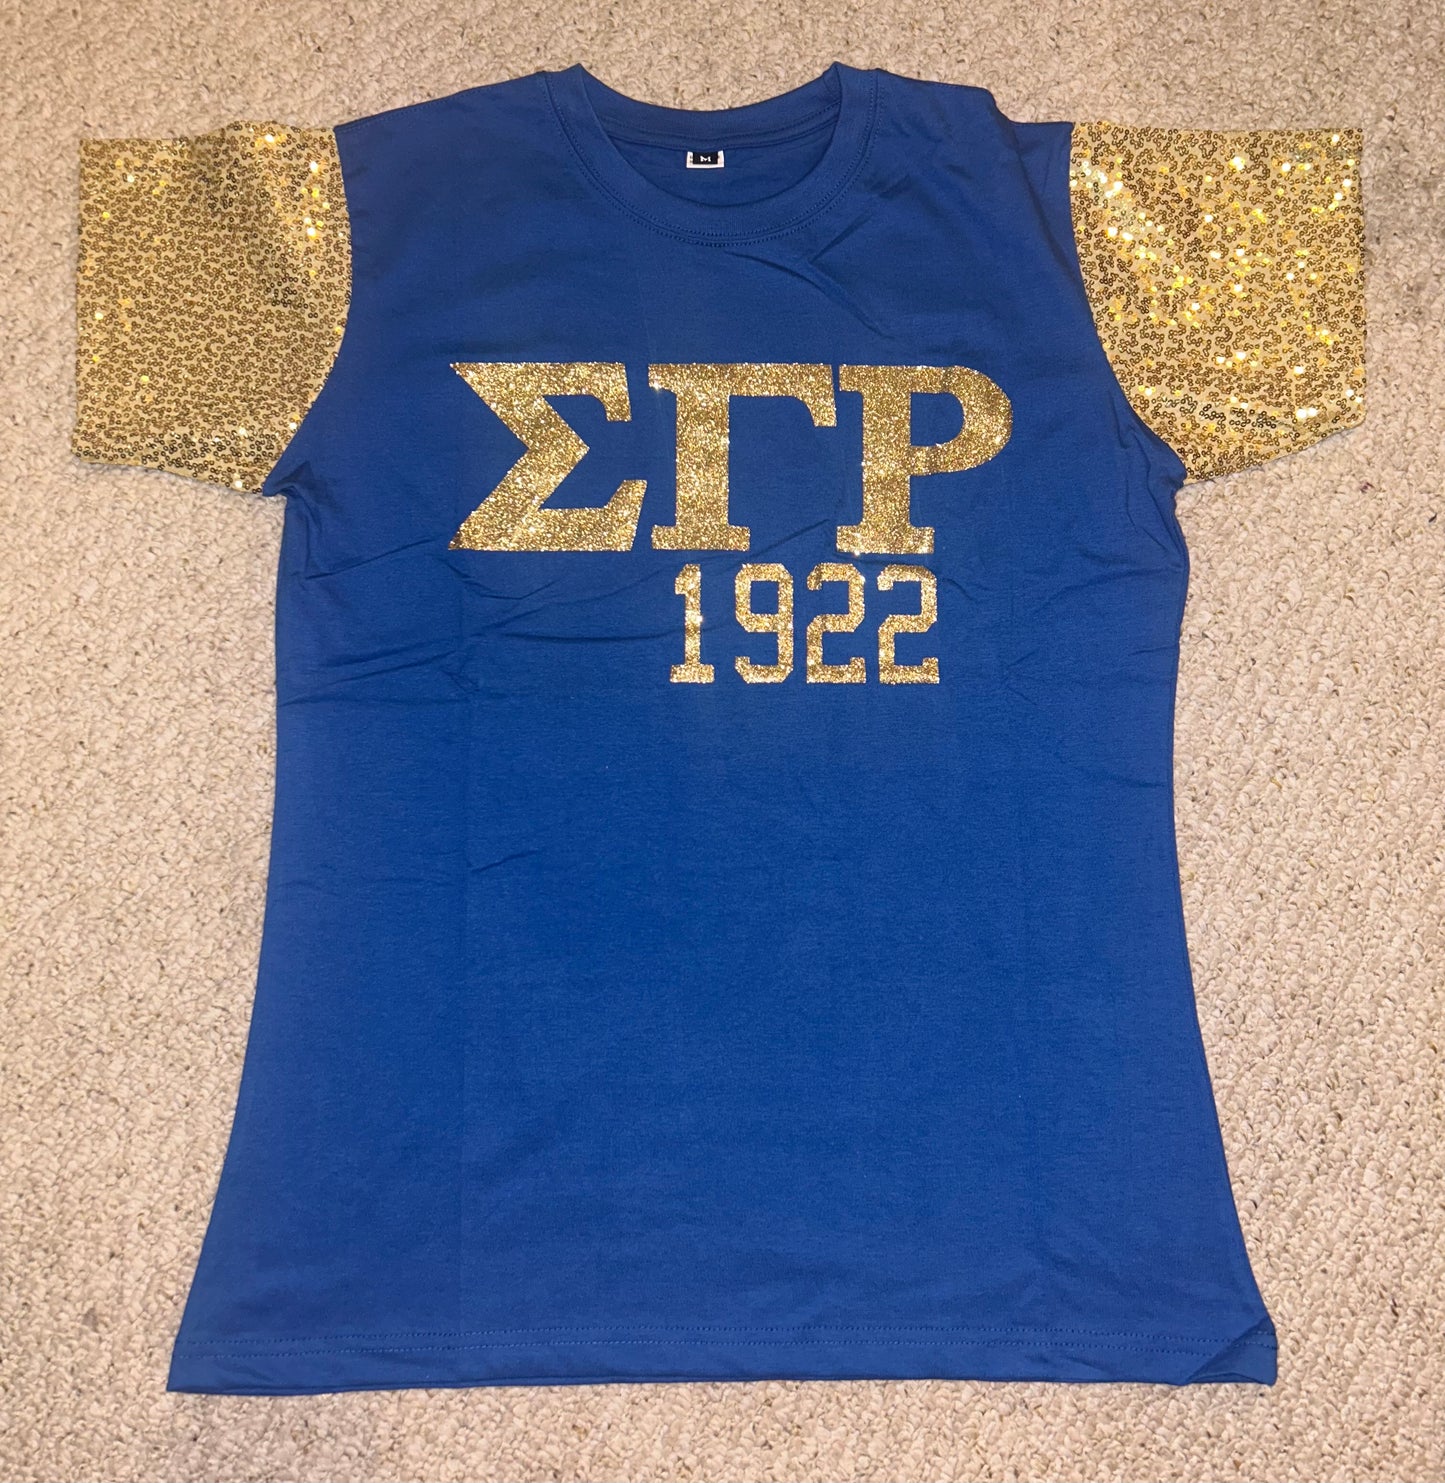 SGRho premium embroidered T shirt